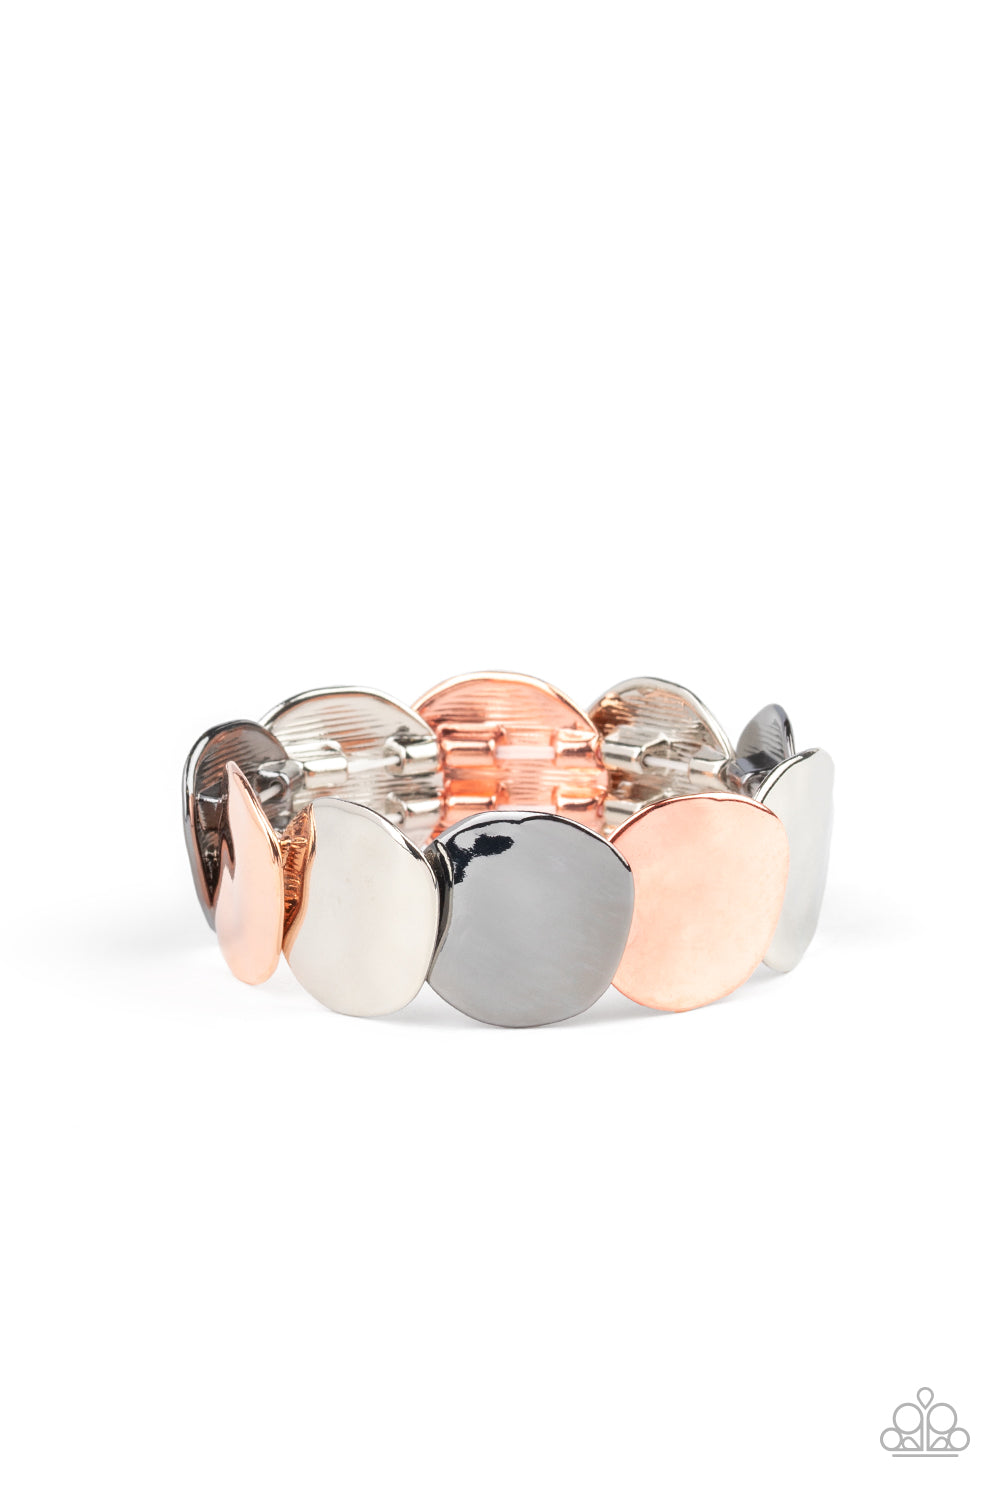 A hammered collection of asymmetrical hammered silver, shiny copper, and gunmetal discs are threaded along stretchy bands, overlapping around the wrist for a refined flair.